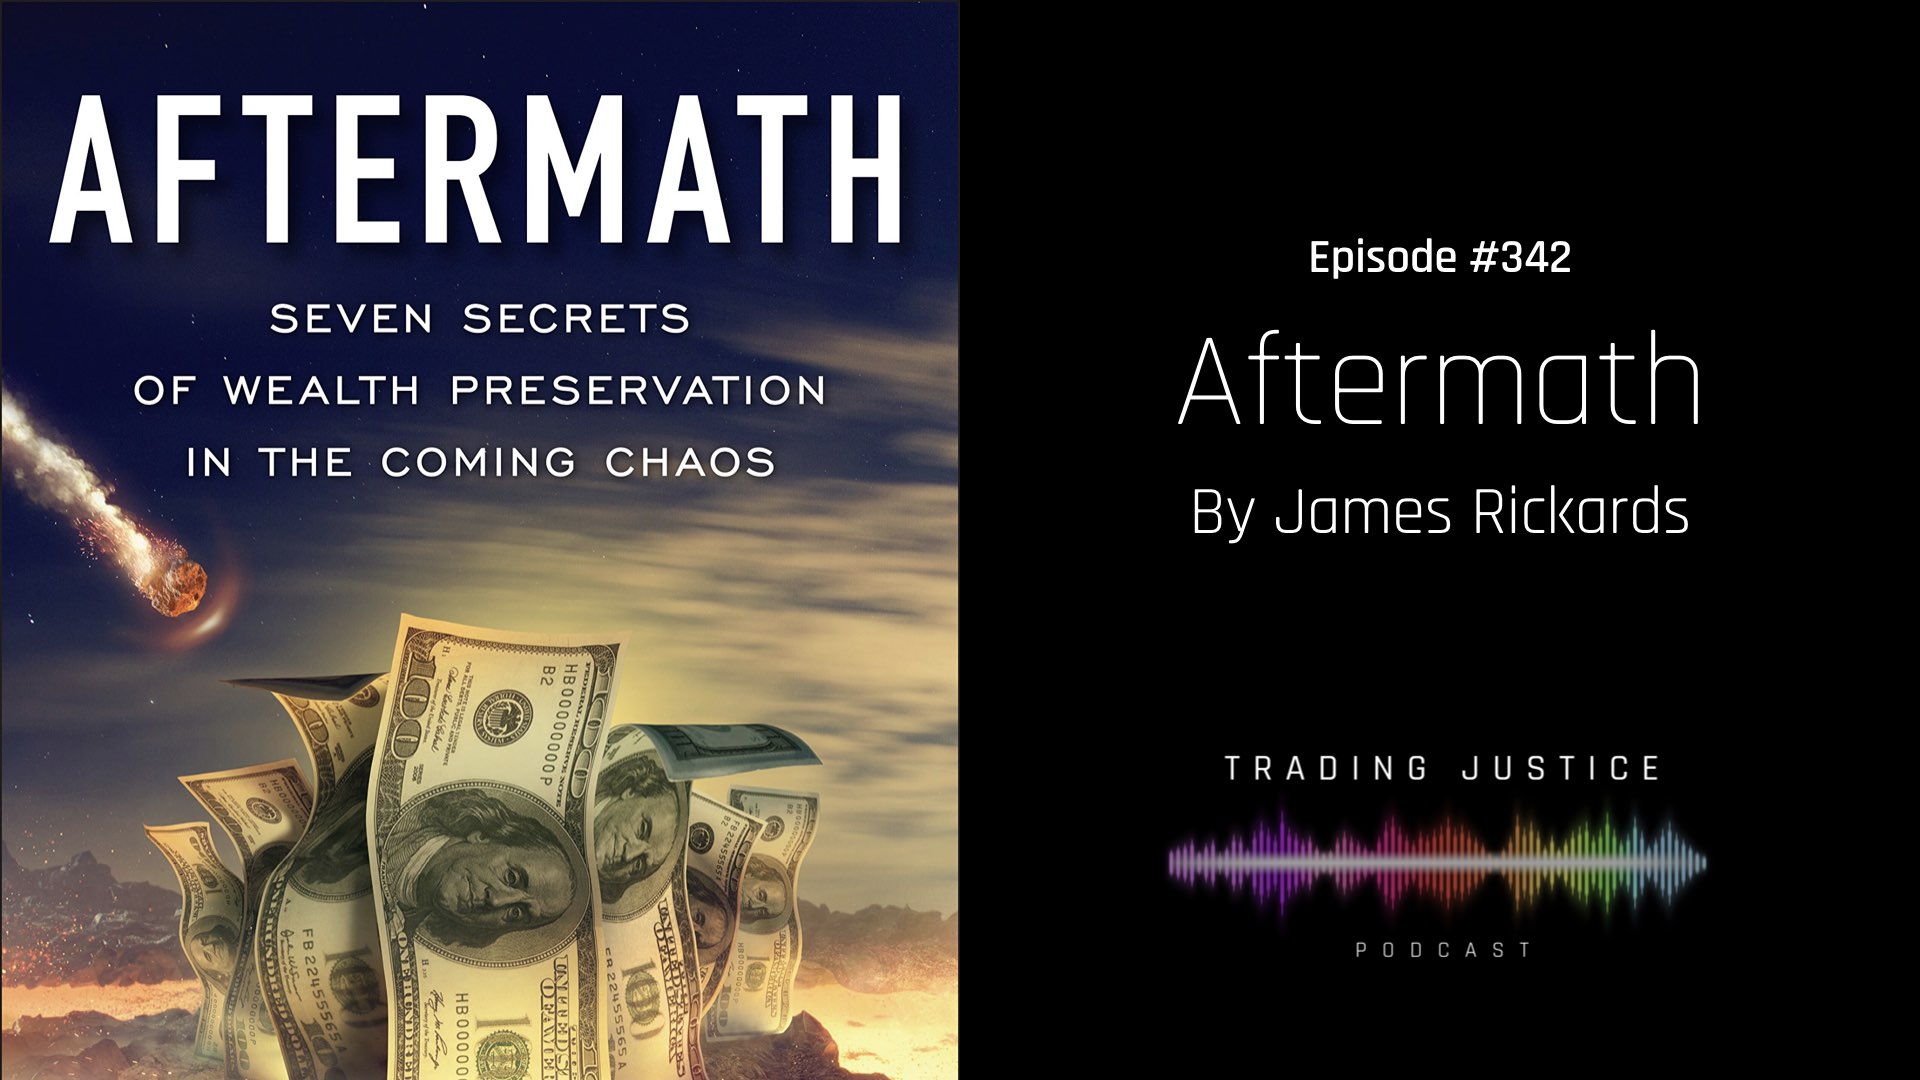 Episode 342: Aftermath by James Rickards